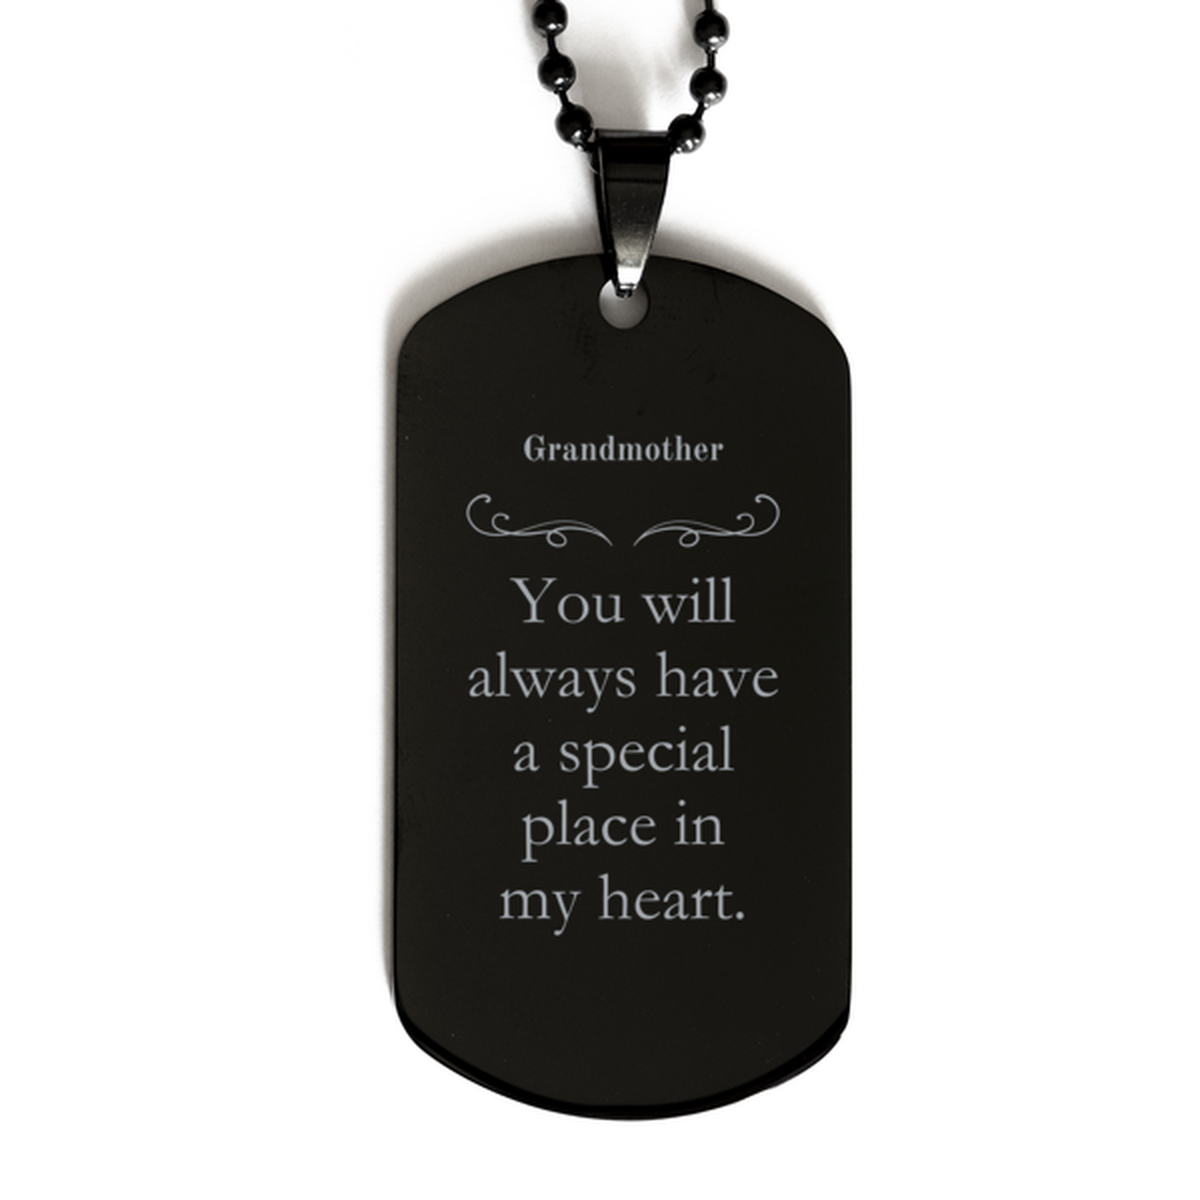 Grandmother Black Dog Tag Engraved with Special Place in Heart Perfect for Birthday or Christmas Gift